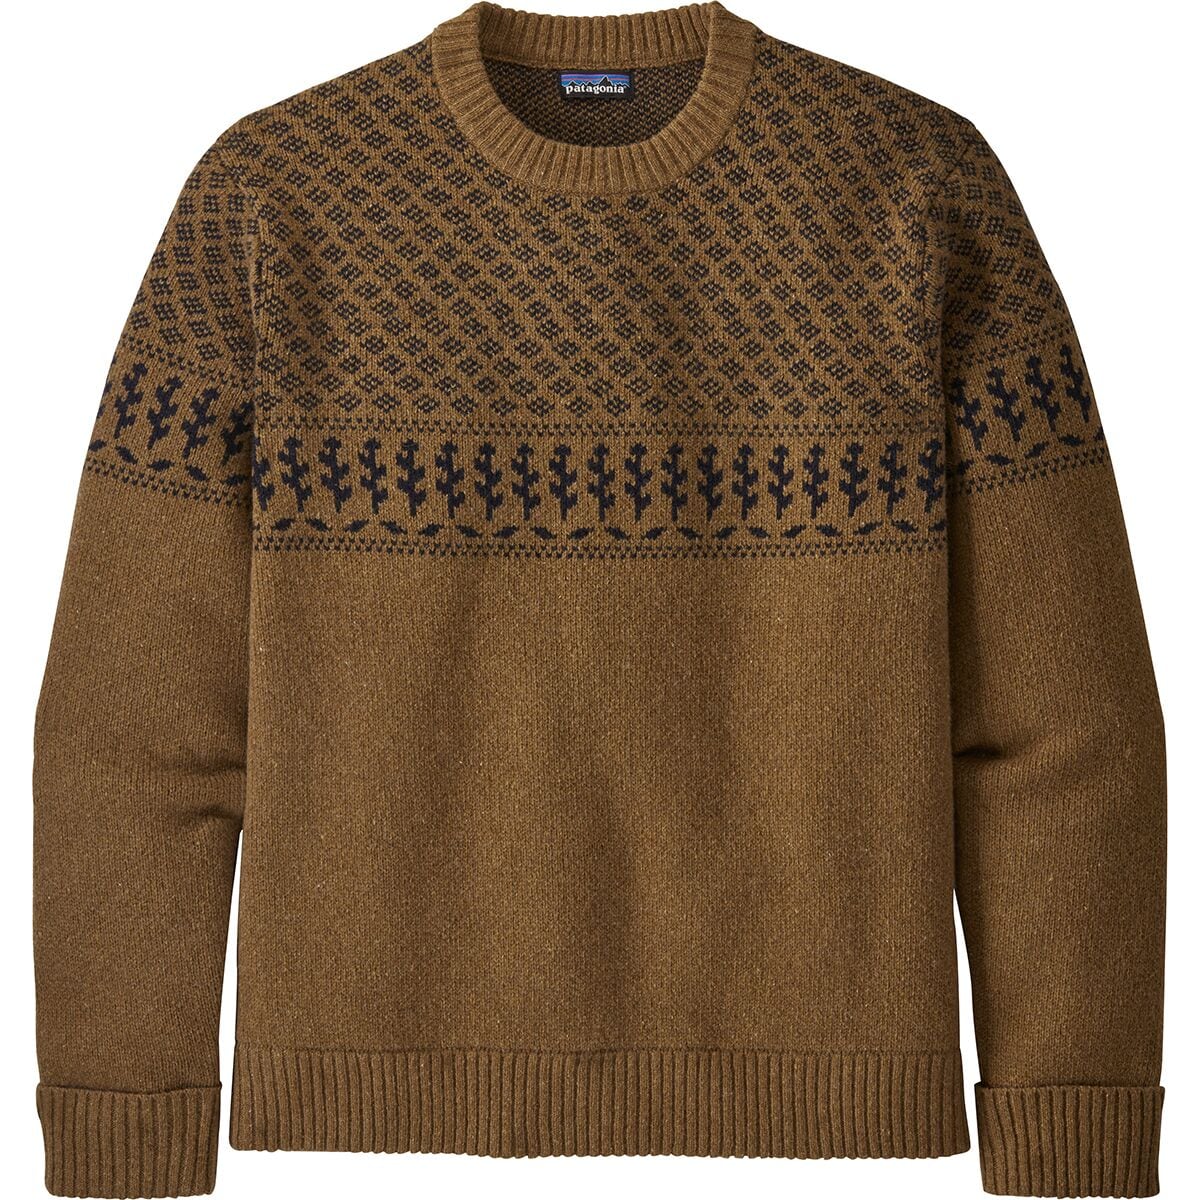 Recycled Wool Sweater - Men